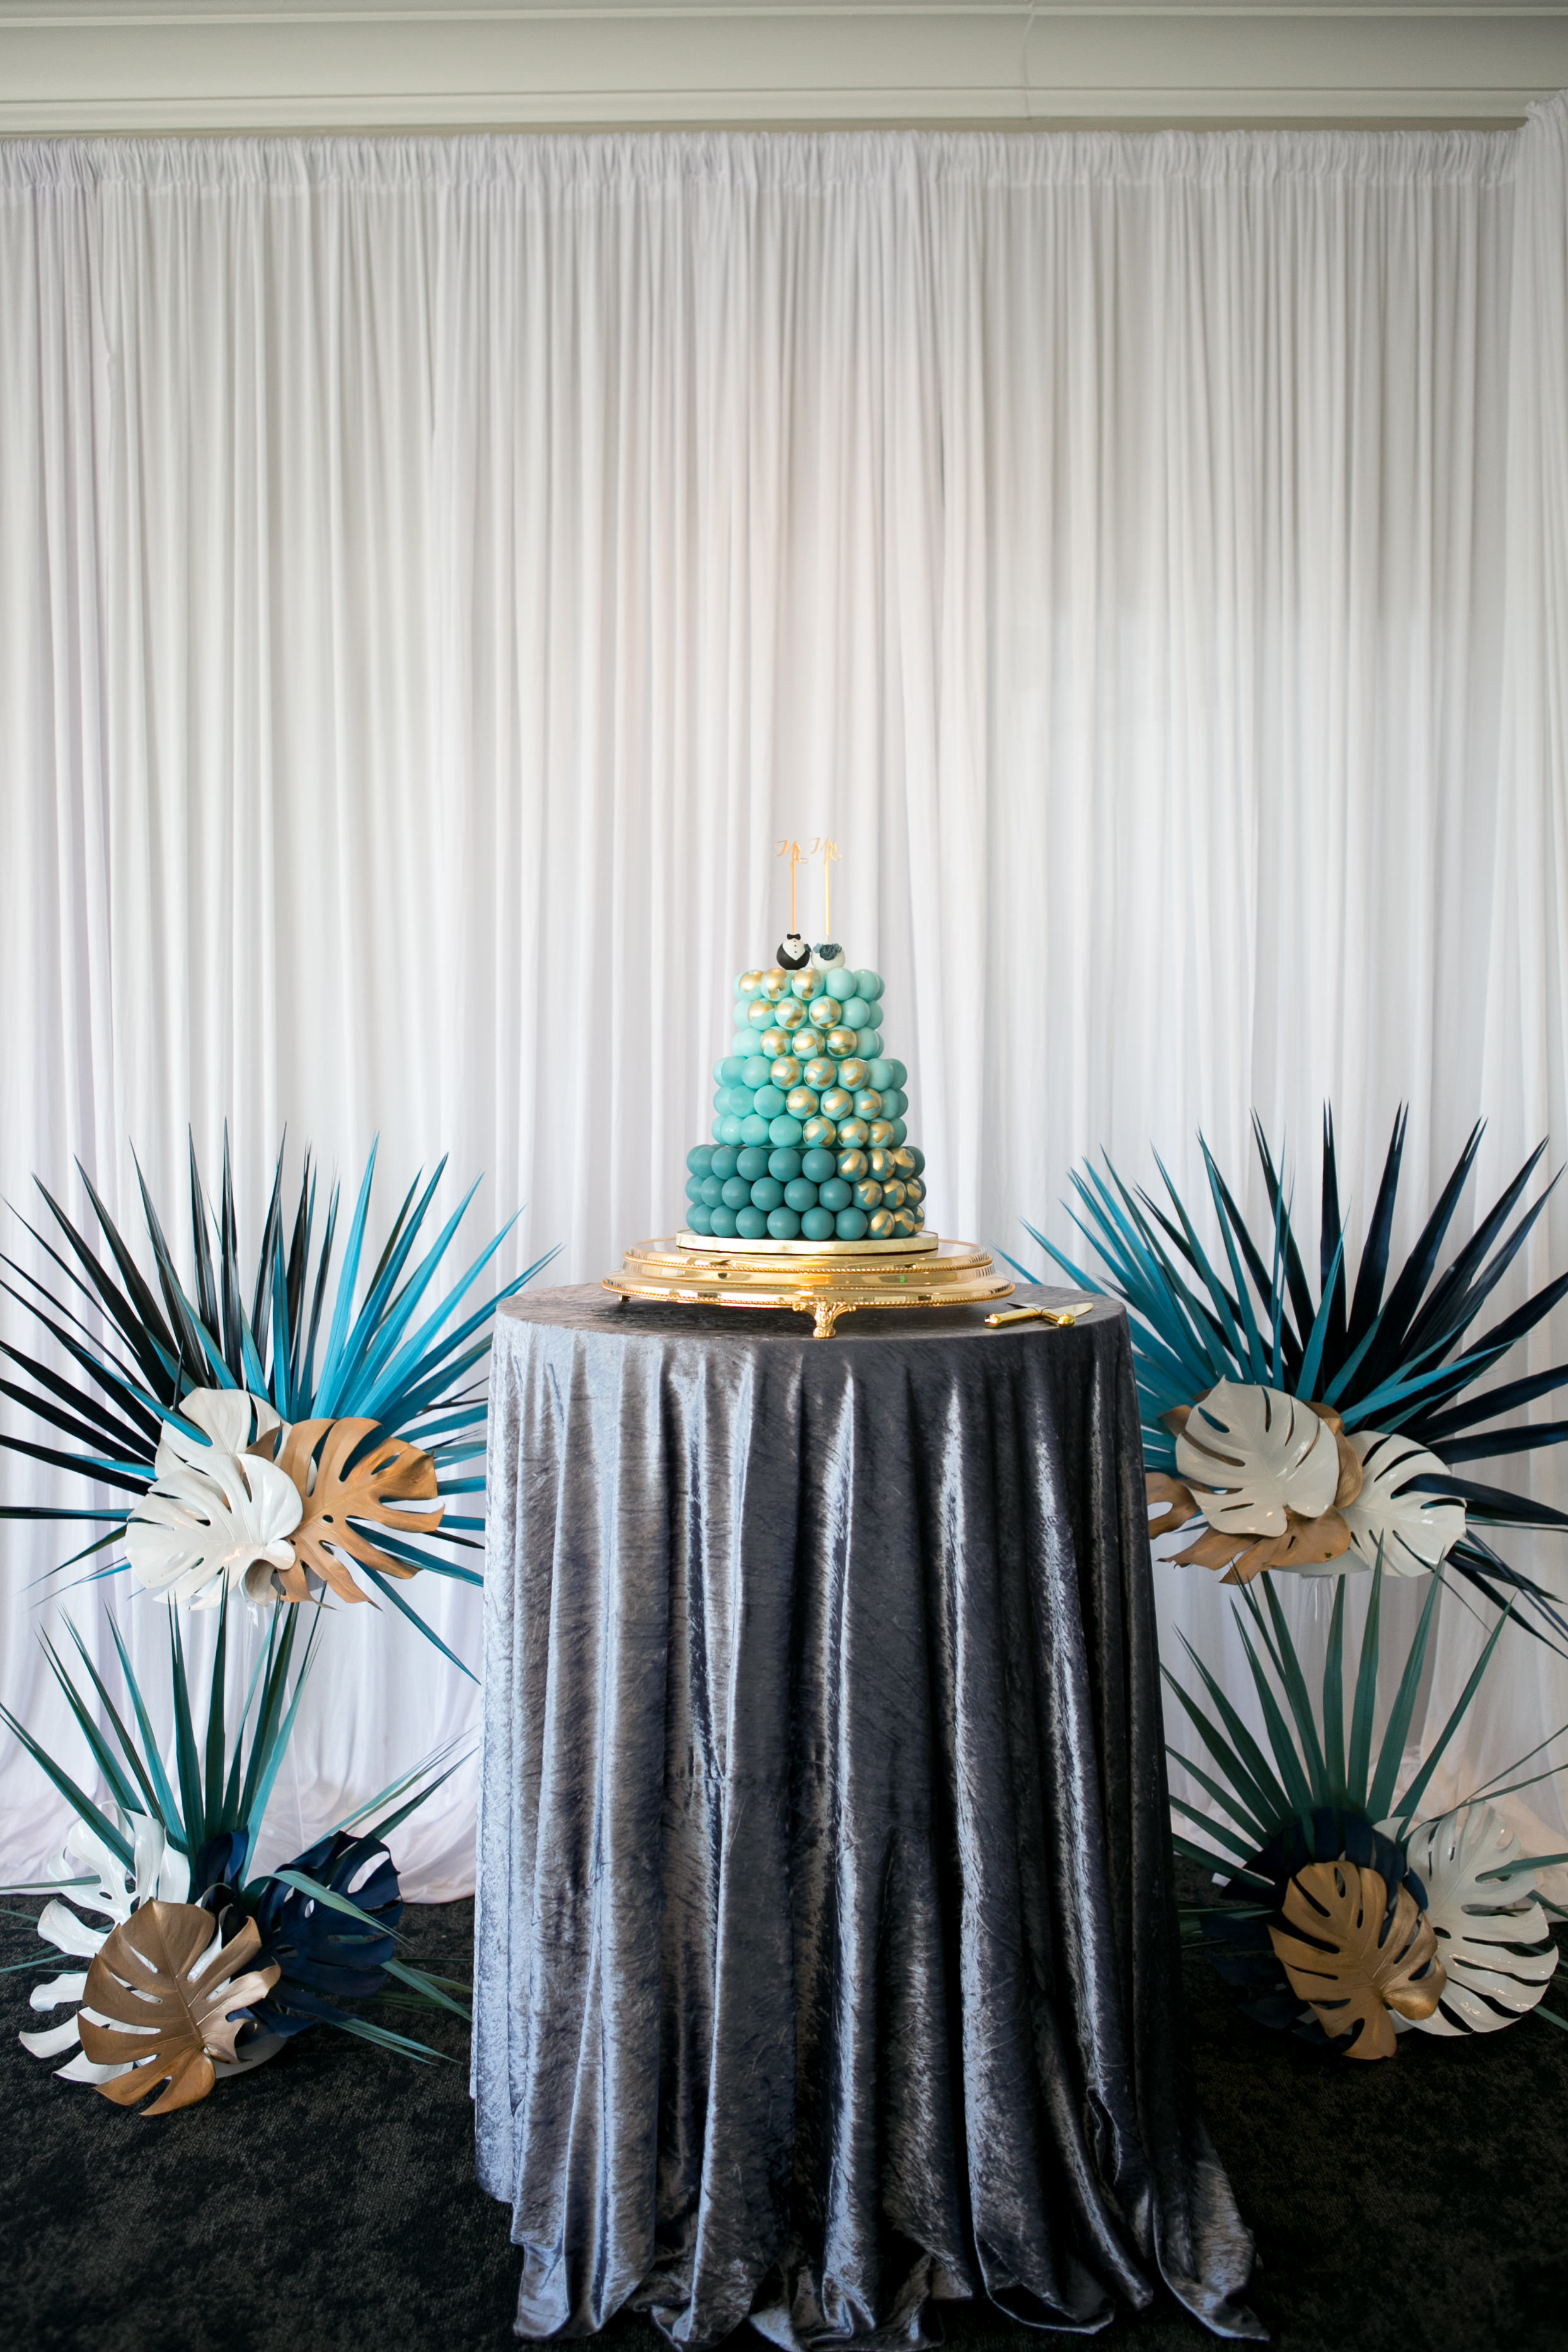 Unique Whimsical Ombre Blue with Gold Accent Cake Pop Three Tier Wedding Cake on Table with Midnight Blue Velvet Linen, White, Gold and Blue Monstera Palm Tree Leaves | Wedding Planner and Florist John Campbell Weddings | Tampa Wedding Venue Centre Club | Wedding Linen Rentals Kate Ryan Event Rentals | Tampa Wedding Cake Pop Cake Sweetly Dipped Confections